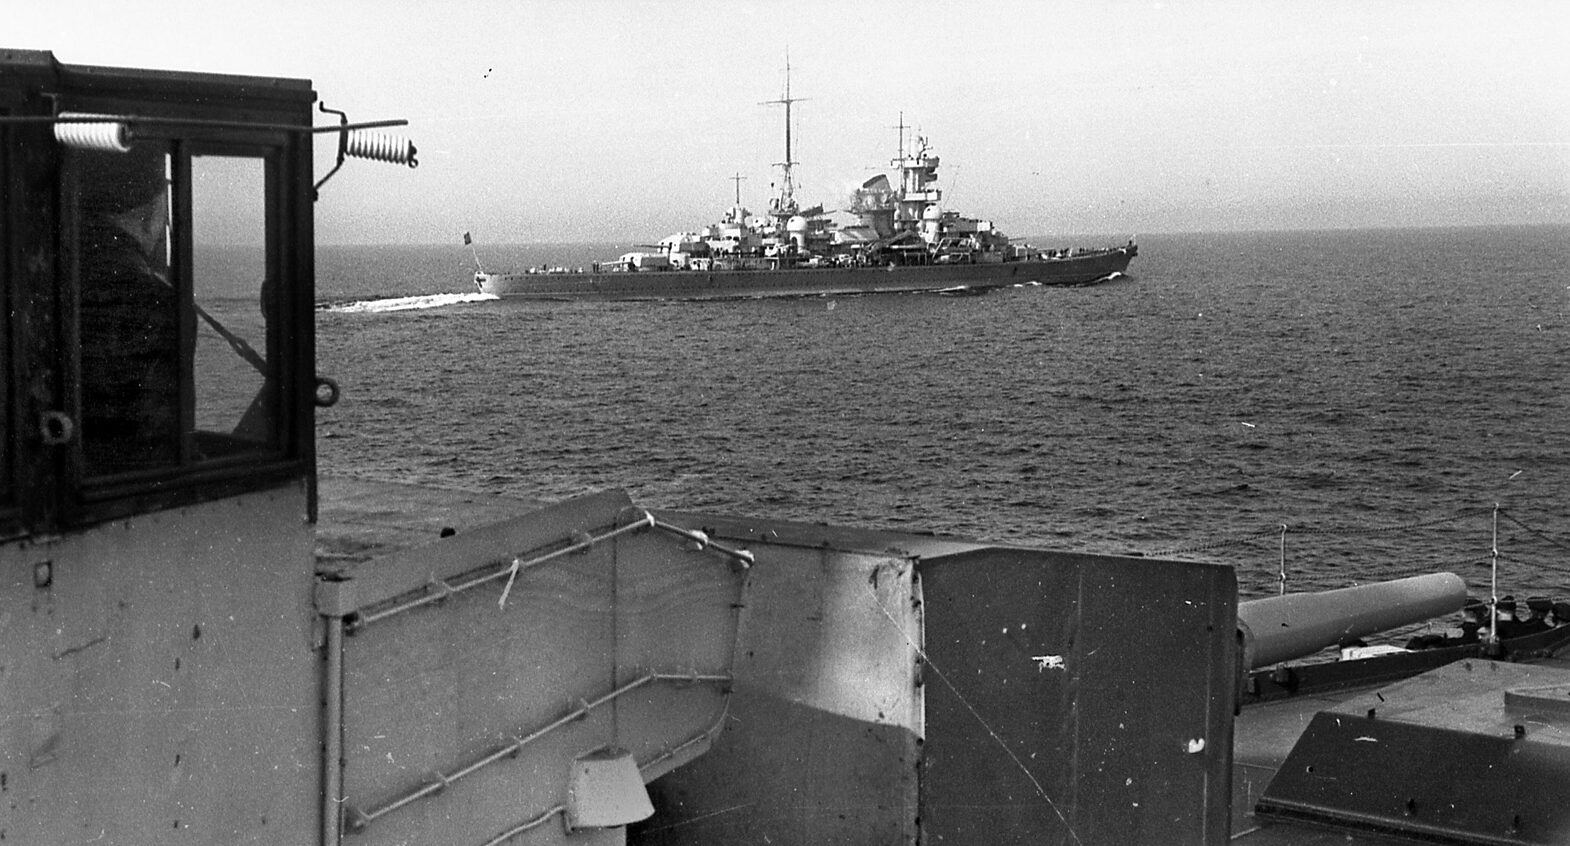 En route to its fate during the invasion of Norway, the Kriegsmarine heavy cruiser Blücher sails in company with other German warships. This photograph was taken from the deck of the light cruiser Emden.